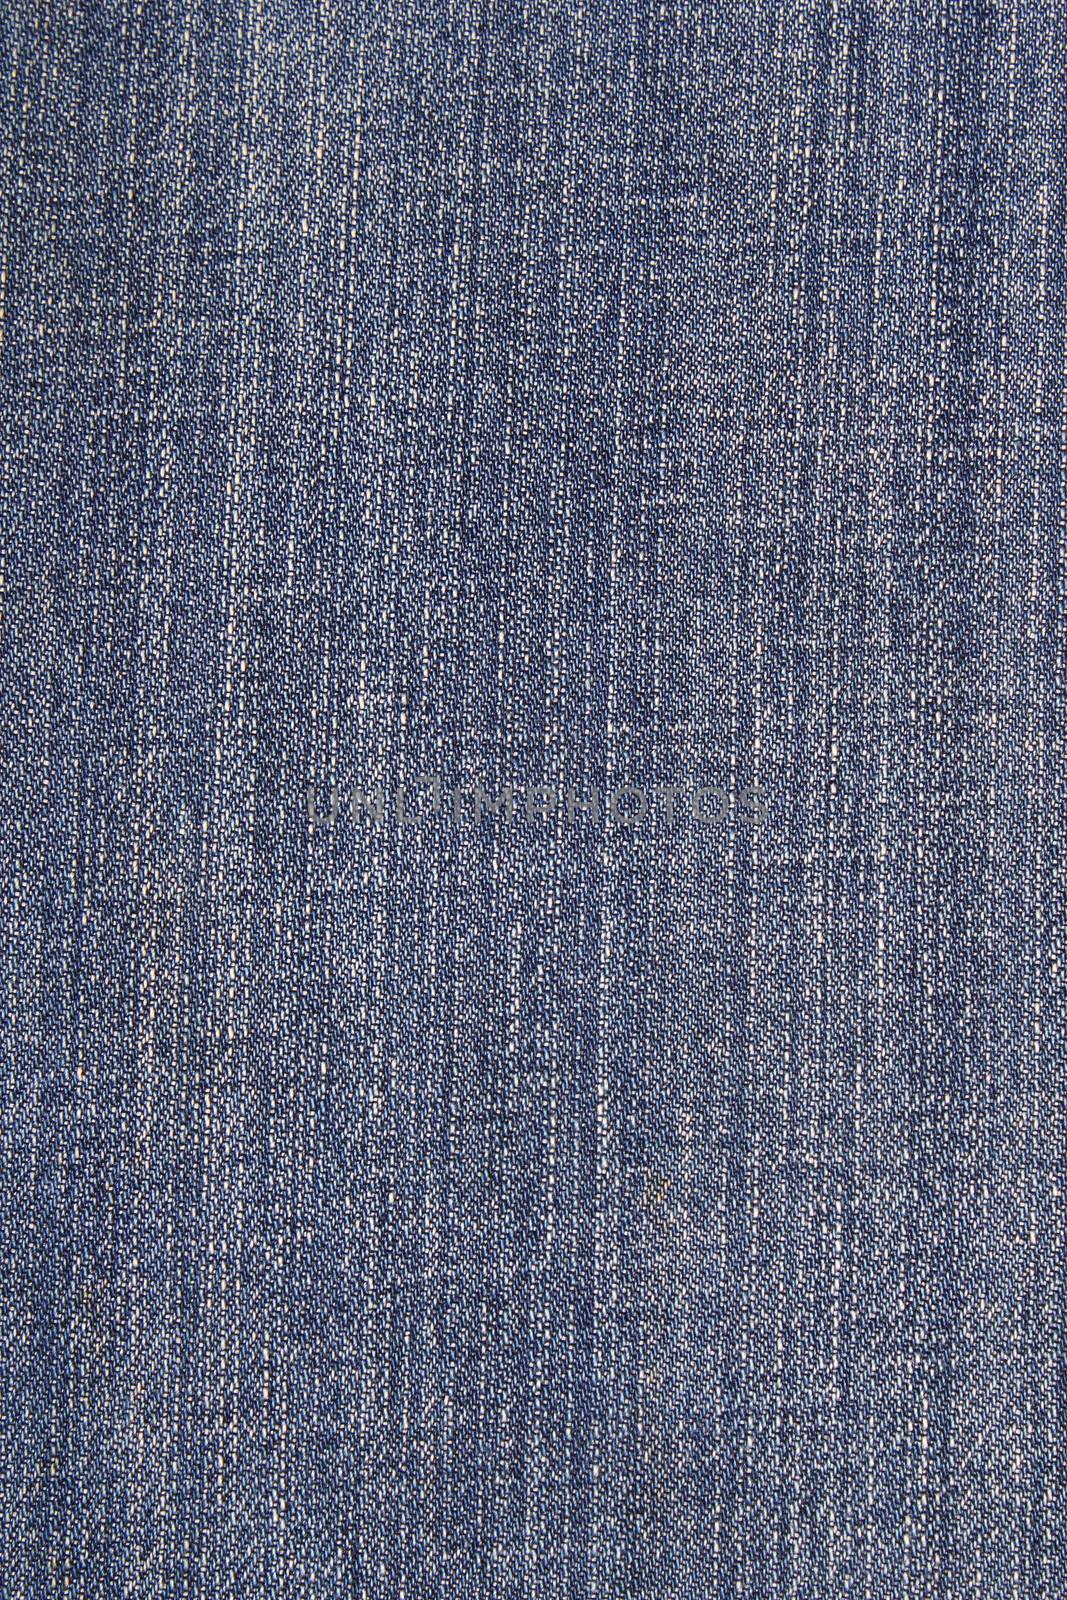 Beautiful blue jeans texture fabric